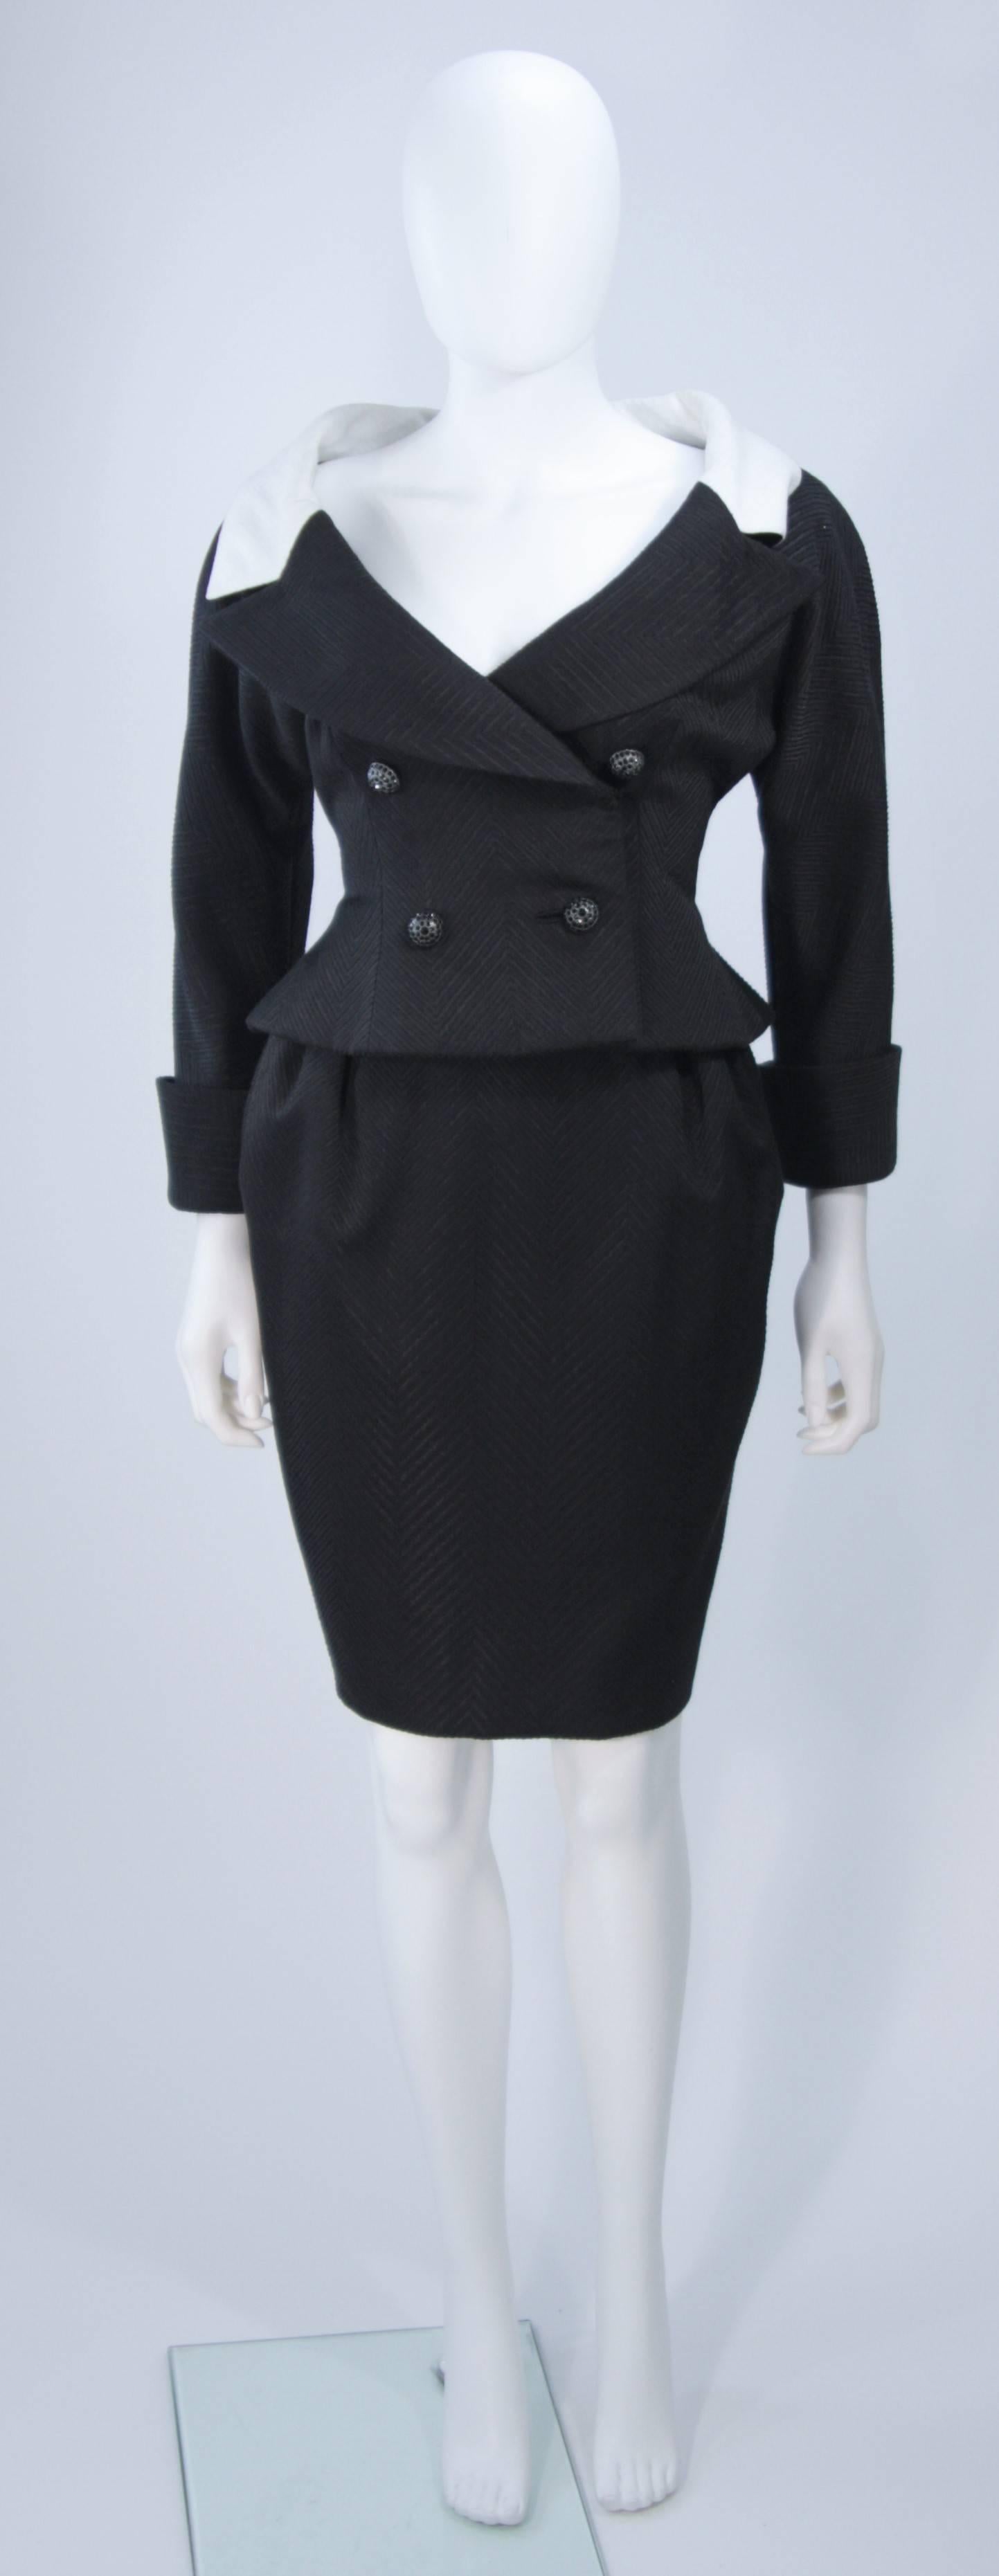  This Jean Patou Couture skirt suit is composed of a black and white contrasting linen combination. The jacket features a wide neck style with large black rhinestone buttons, a slight peplum flair at the waist, and center back bow detail. The skirt